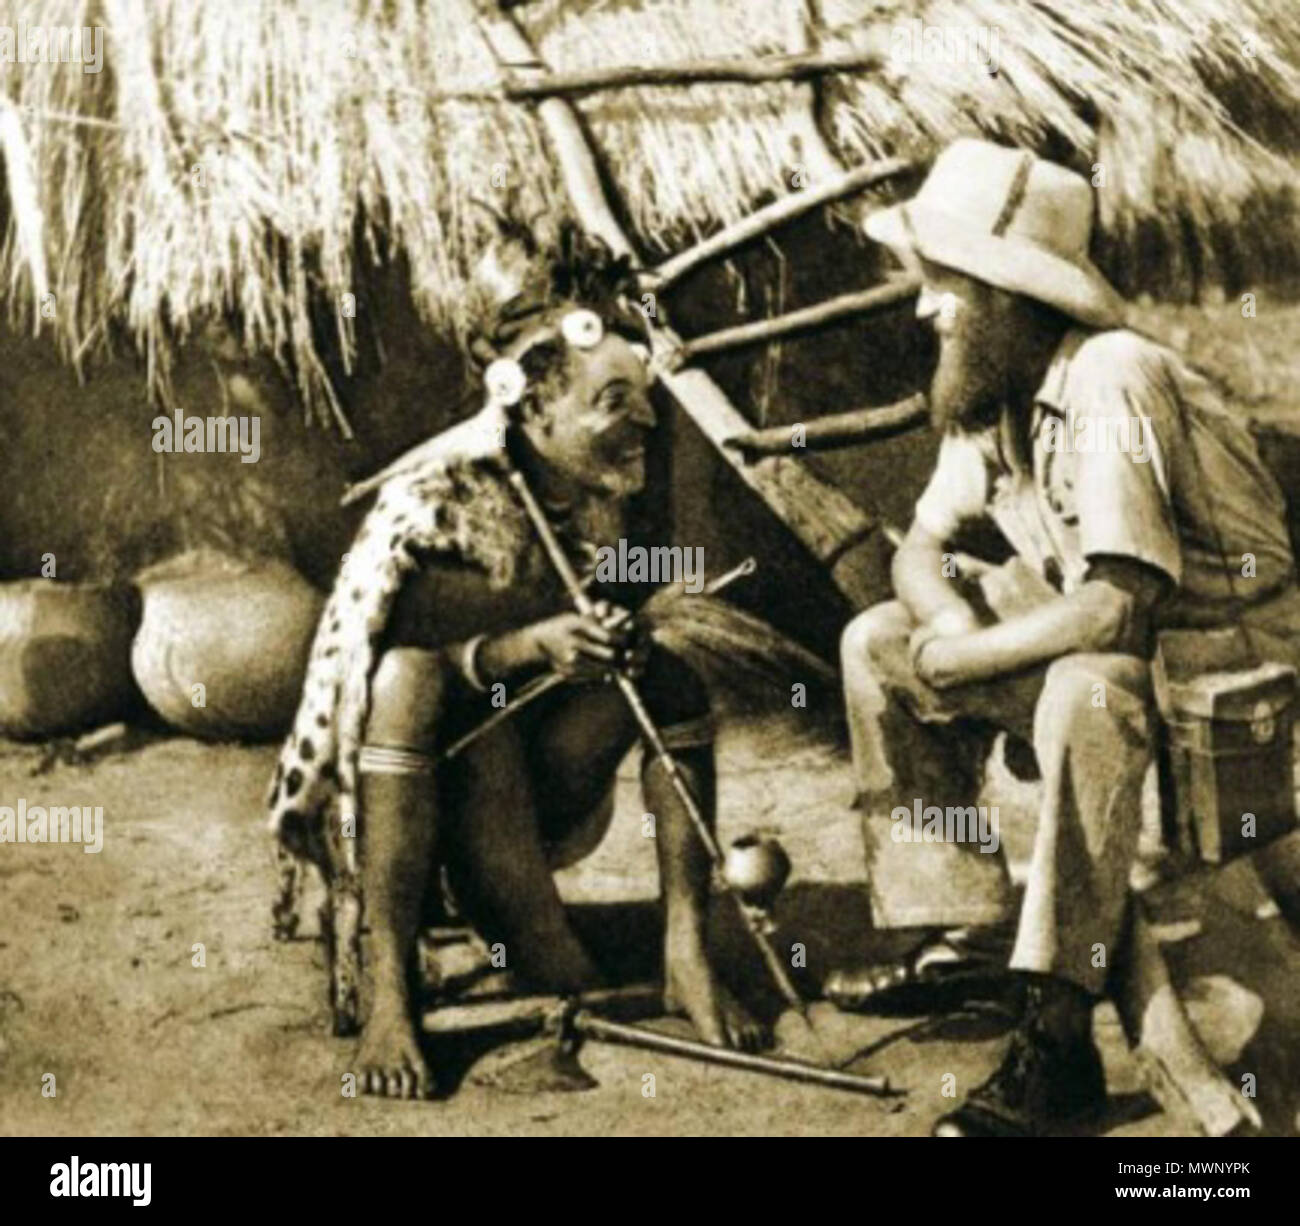 . Talking with a pygmy shaman in Africa. The photo probably taken by Kazimierz Nowak (1897-1937, the author is on the photo; taken probably by a self-timer) during his trip through Africa - a Polish traveller, correspondent and photographer. Probably the first man in the world who crossed Africa alone from the North to the South and from the South to the North (from 1931 to 1936; on foot, by bicycle and canoe). circa about 1931-36. probably Kazimierz Nowak or an unknown author 507 Pygmy shaman Stock Photo